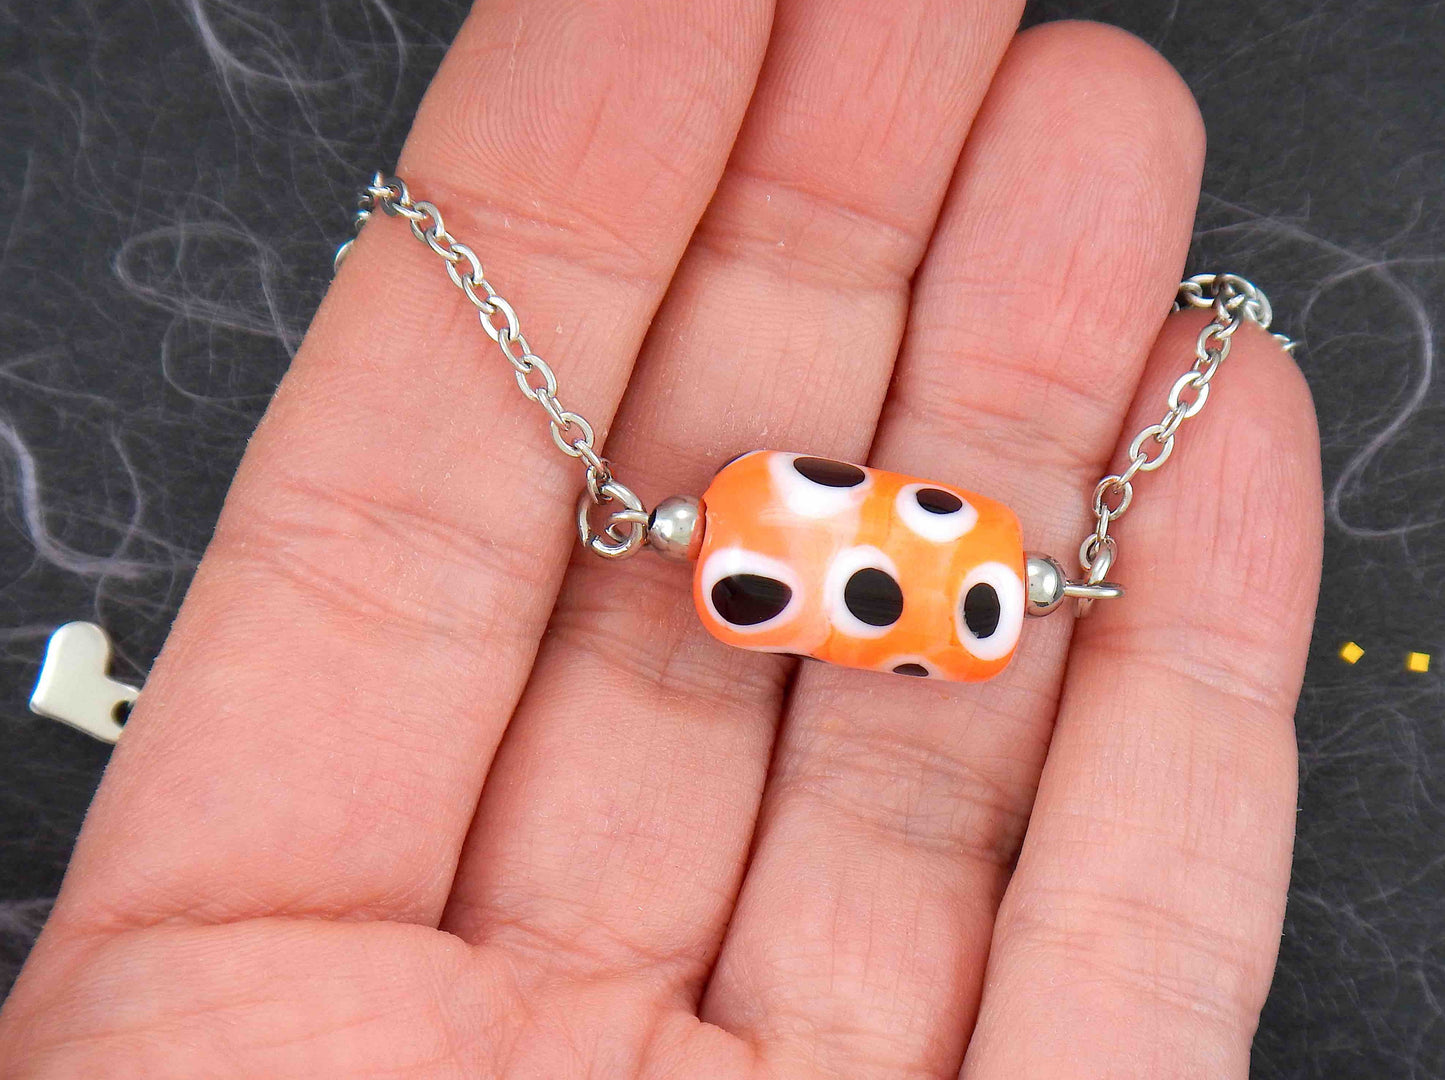 14-inch necklace with bright orange glass cylinder, black and white dots (Murano-style glass handmade in Montreal), stainless steel chain